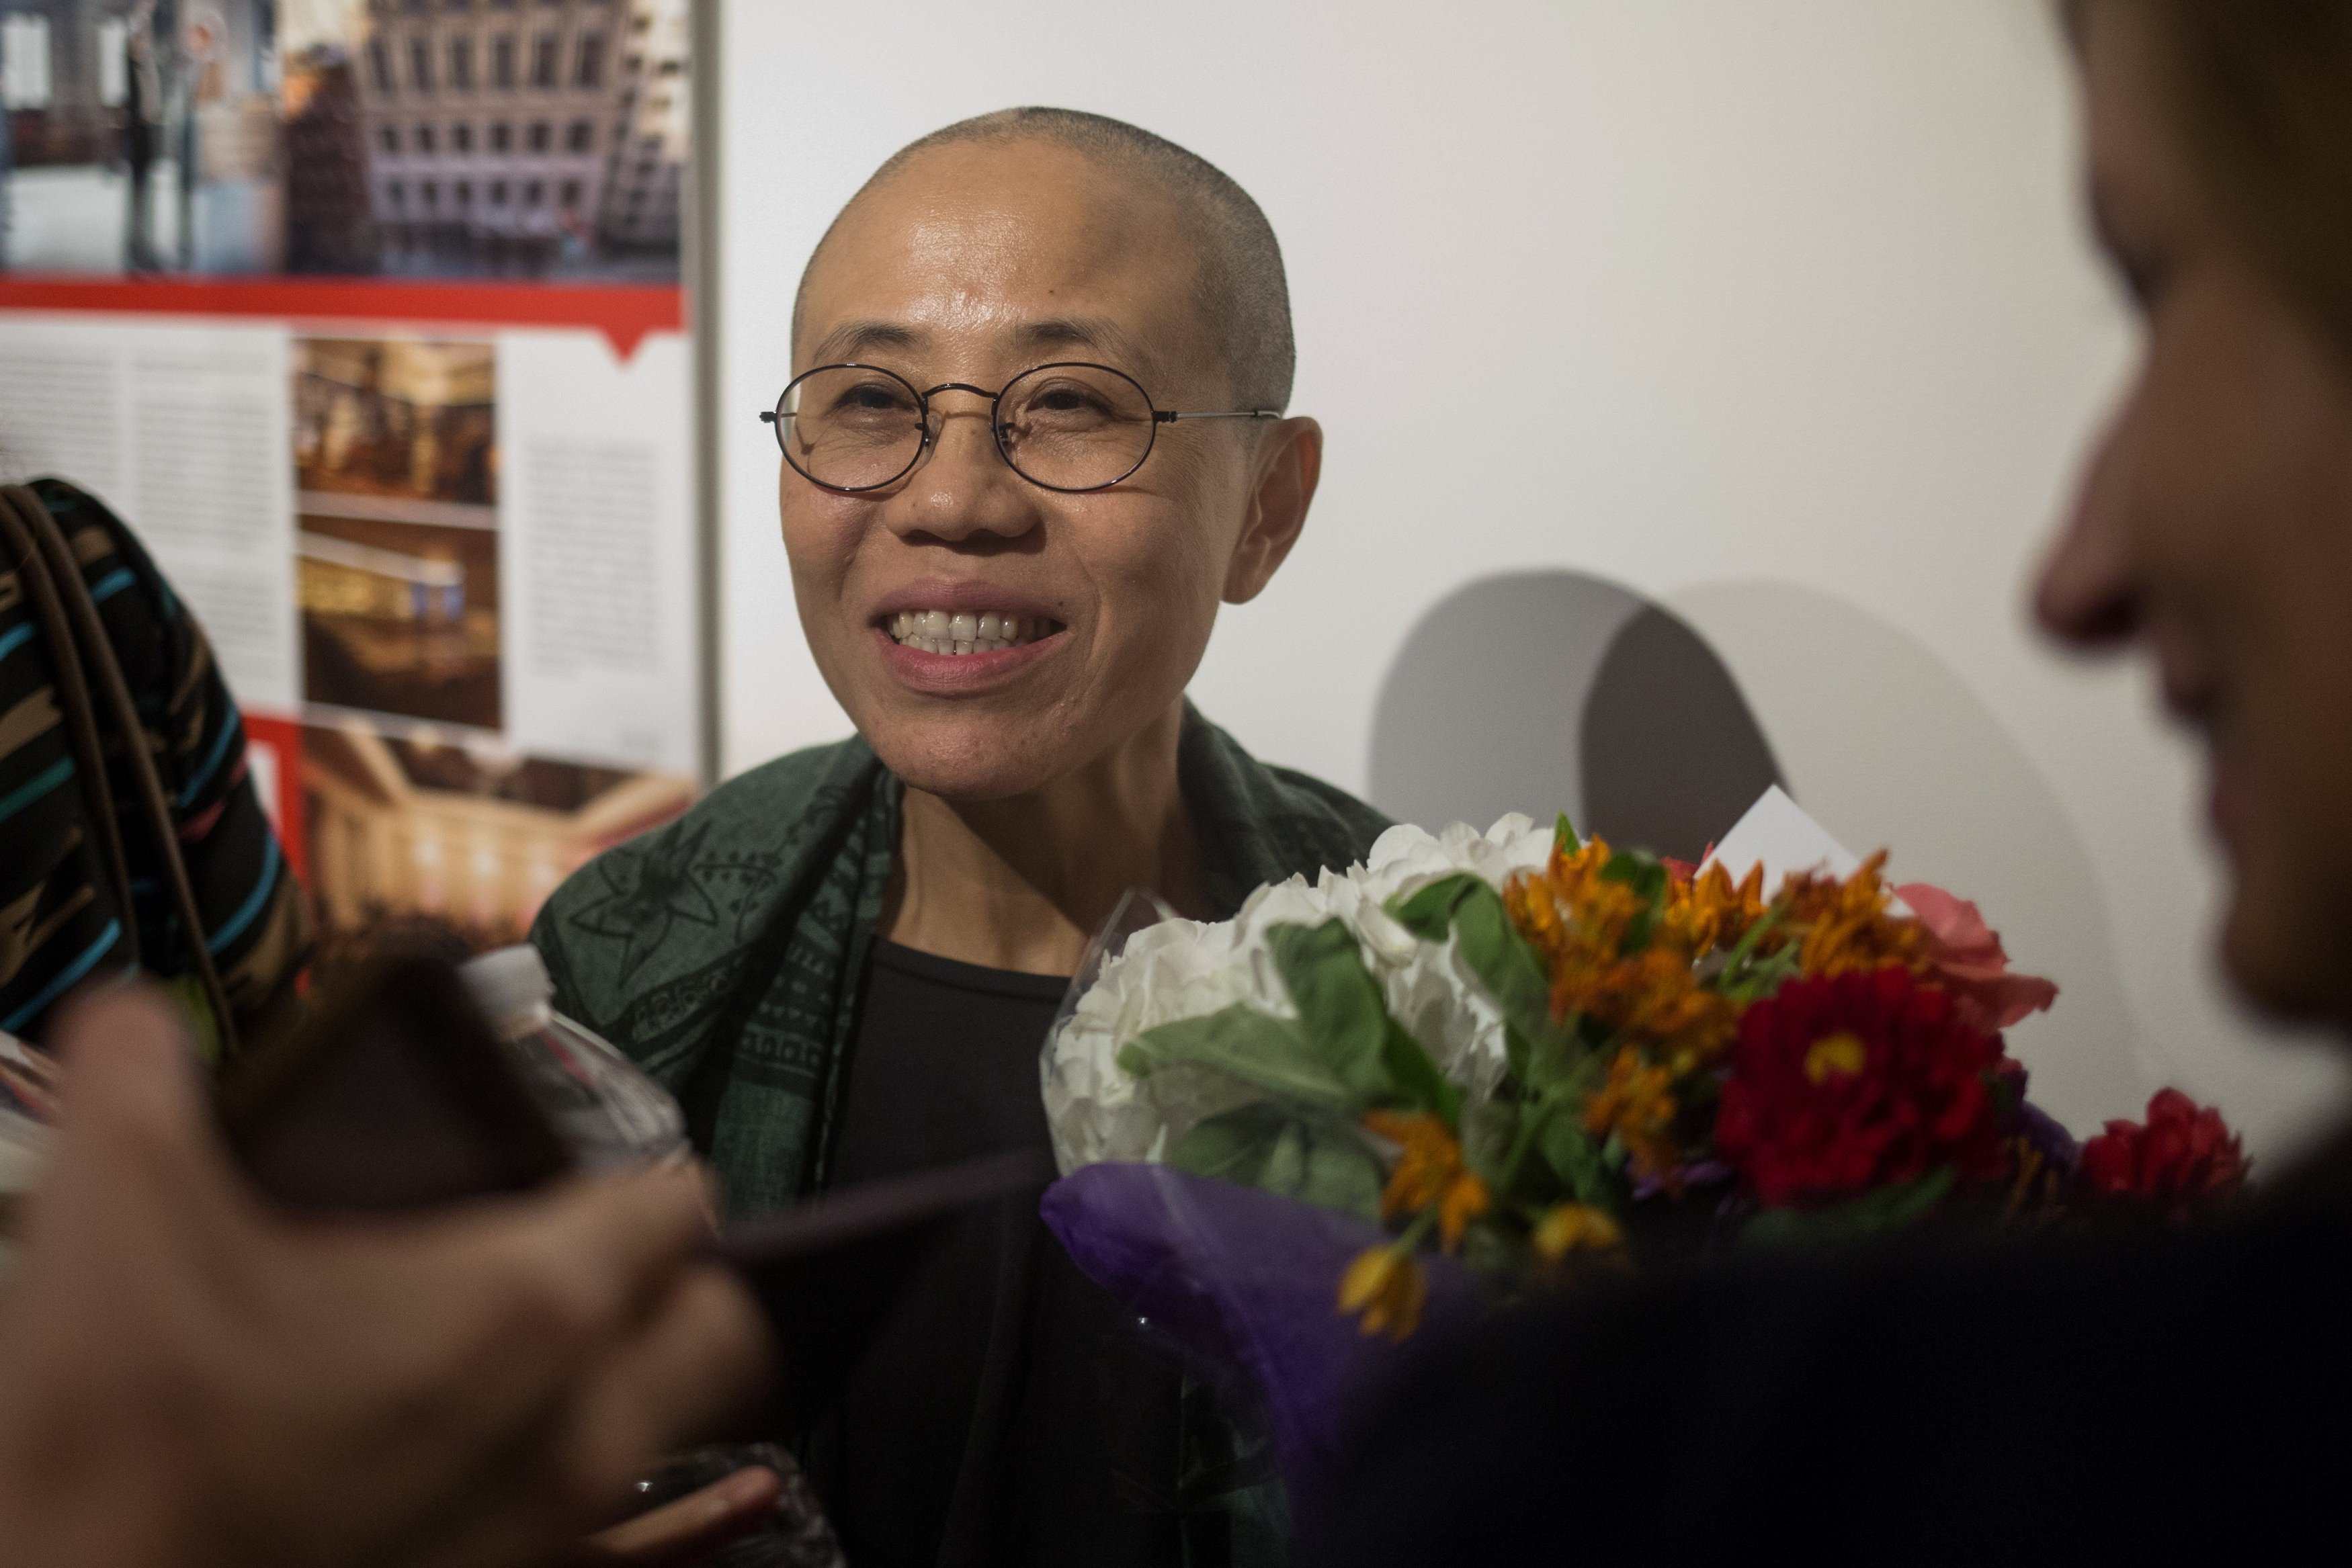 Liu Xia, Chinese artist, poet, and the widow of Chinese Nobel Peace Prize-winning political dissident Liu Xiaobo, takes part in a human rights panel discussion in New York on Wednesday. Photo: Reuters